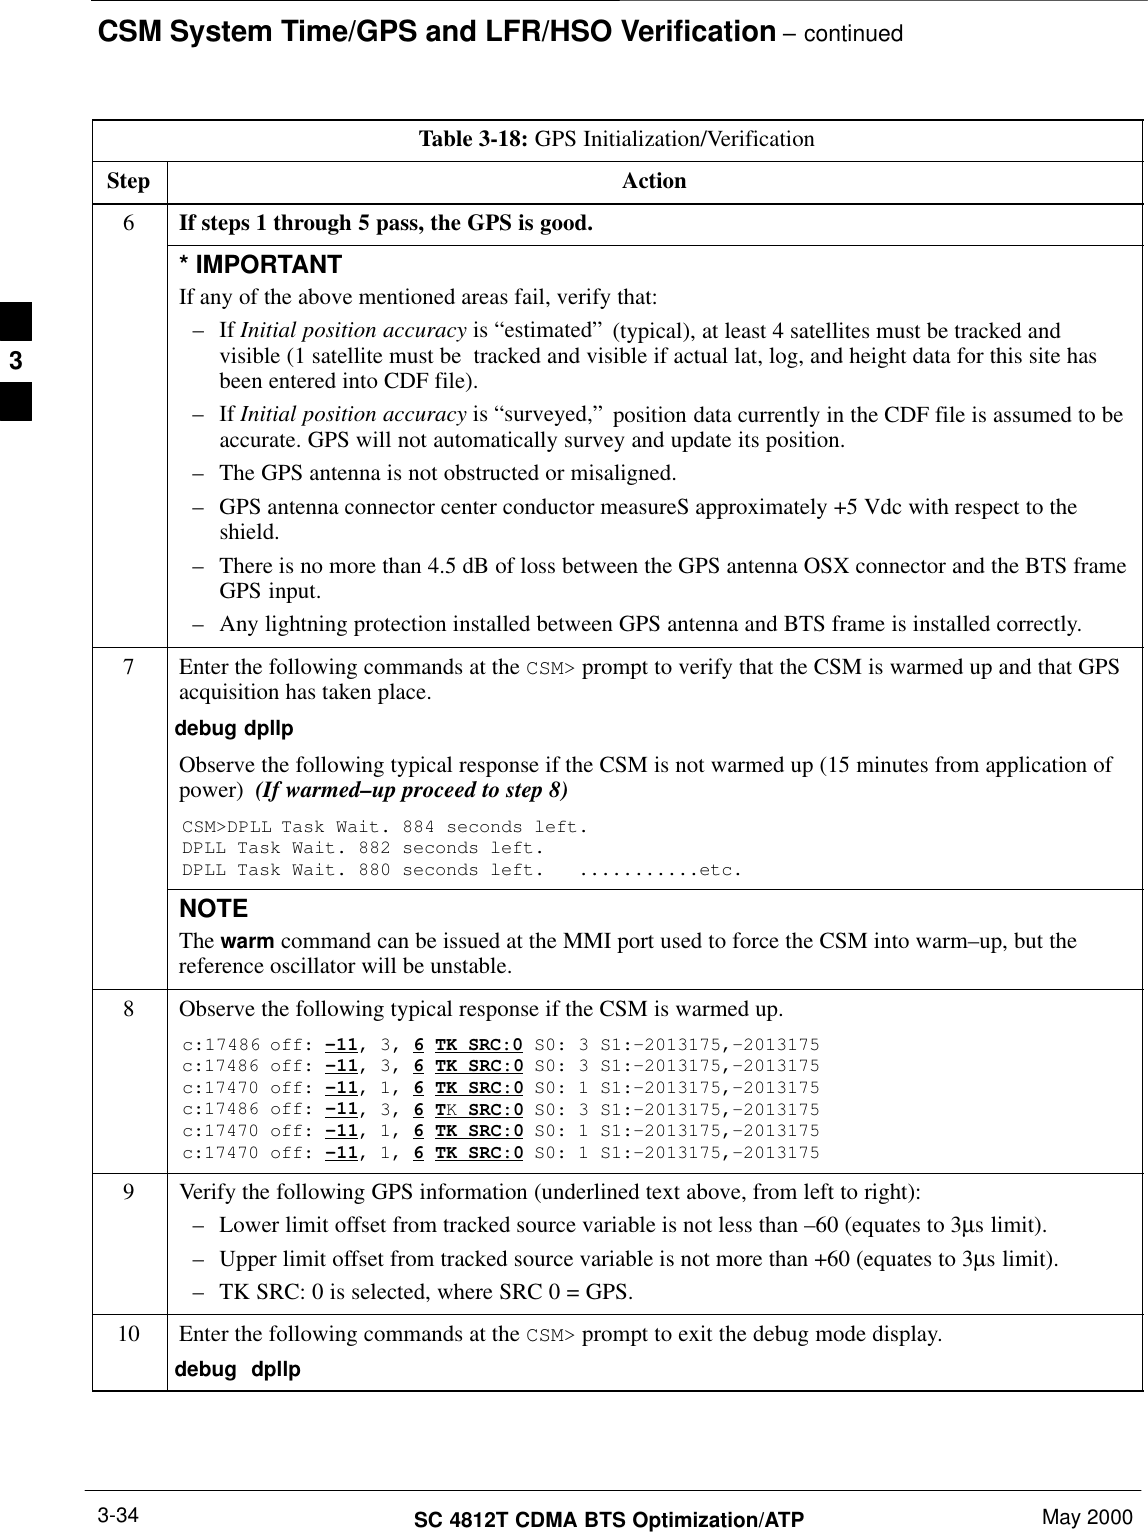 CSM System Time/GPS and LFR/HSO Verification – continuedSC 4812T CDMA BTS Optimization/ATP May 20003-34Table 3-18: GPS Initialization/VerificationStep Action6If steps 1 through 5 pass, the GPS is good.* IMPORTANTIf any of the above mentioned areas fail, verify that:– If Initial position accuracy is “estimated” (typical), at least 4 satellites must be tracked andvisible (1 satellite must be  tracked and visible if actual lat, log, and height data for this site hasbeen entered into CDF file).– If Initial position accuracy is “surveyed,” position data currently in the CDF file is assumed to beaccurate. GPS will not automatically survey and update its position.– The GPS antenna is not obstructed or misaligned.– GPS antenna connector center conductor measureS approximately +5 Vdc with respect to theshield.– There is no more than 4.5 dB of loss between the GPS antenna OSX connector and the BTS frameGPS input.– Any lightning protection installed between GPS antenna and BTS frame is installed correctly.7Enter the following commands at the CSM&gt; prompt to verify that the CSM is warmed up and that GPSacquisition has taken place.debug dpllp Observe the following typical response if the CSM is not warmed up (15 minutes from application ofpower)  (If warmed–up proceed to step 8)CSM&gt;DPLL Task Wait. 884 seconds left.DPLL Task Wait. 882 seconds left.DPLL Task Wait. 880 seconds left.   ...........etc.NOTEThe warm command can be issued at the MMI port used to force the CSM into warm–up, but thereference oscillator will be unstable.8Observe the following typical response if the CSM is warmed up.c:17486 off: –11, 3, 6 TK SRC:0 S0: 3 S1:–2013175,–2013175c:17486 off: –11, 3, 6 TK SRC:0 S0: 3 S1:–2013175,–2013175c:17470 off: –11, 1, 6 TK SRC:0 S0: 1 S1:–2013175,–2013175c:17486 off: –11, 3, 6 TK SRC:0 S0: 3 S1:–2013175,–2013175c:17470 off: –11, 1, 6 TK SRC:0 S0: 1 S1:–2013175,–2013175c:17470 off: –11, 1, 6 TK SRC:0 S0: 1 S1:–2013175,–20131759Verify the following GPS information (underlined text above, from left to right):– Lower limit offset from tracked source variable is not less than –60 (equates to 3µs limit).– Upper limit offset from tracked source variable is not more than +60 (equates to 3µs limit).– TK SRC: 0 is selected, where SRC 0 = GPS.10 Enter the following commands at the CSM&gt; prompt to exit the debug mode display.debug  dpllp 3